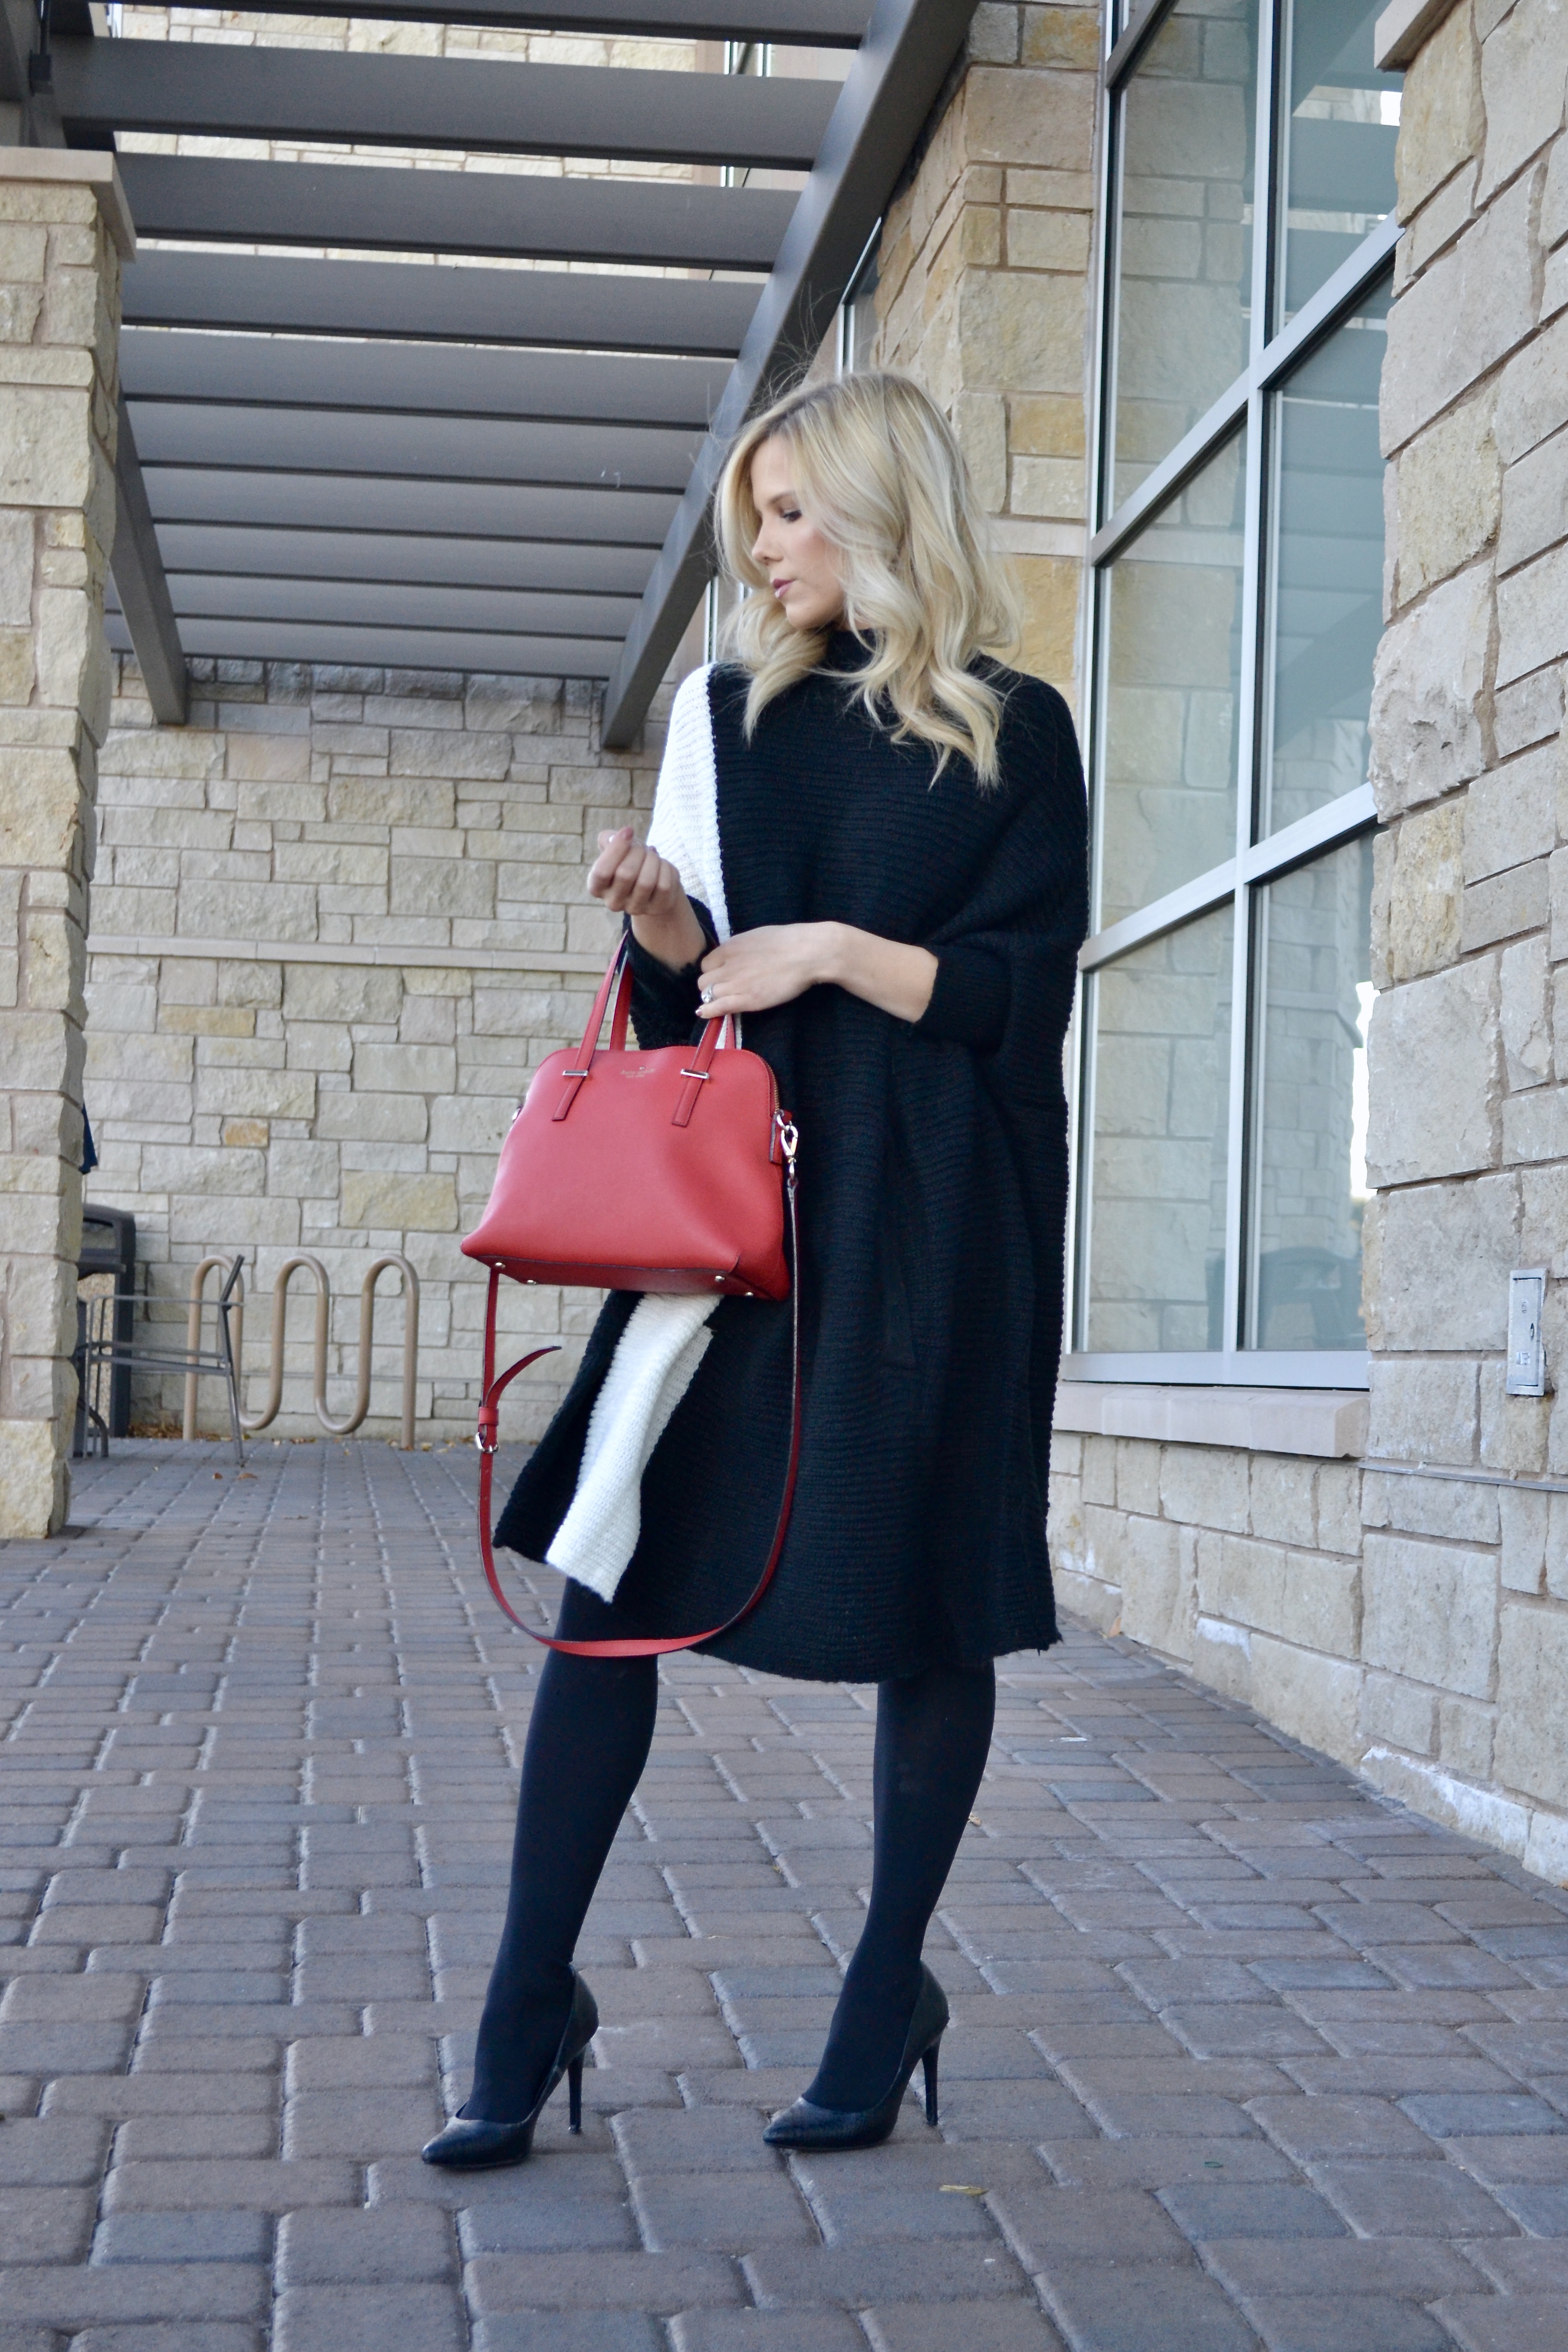 black and white color block sweater with black tights, heels, and a red Kate Spade purse